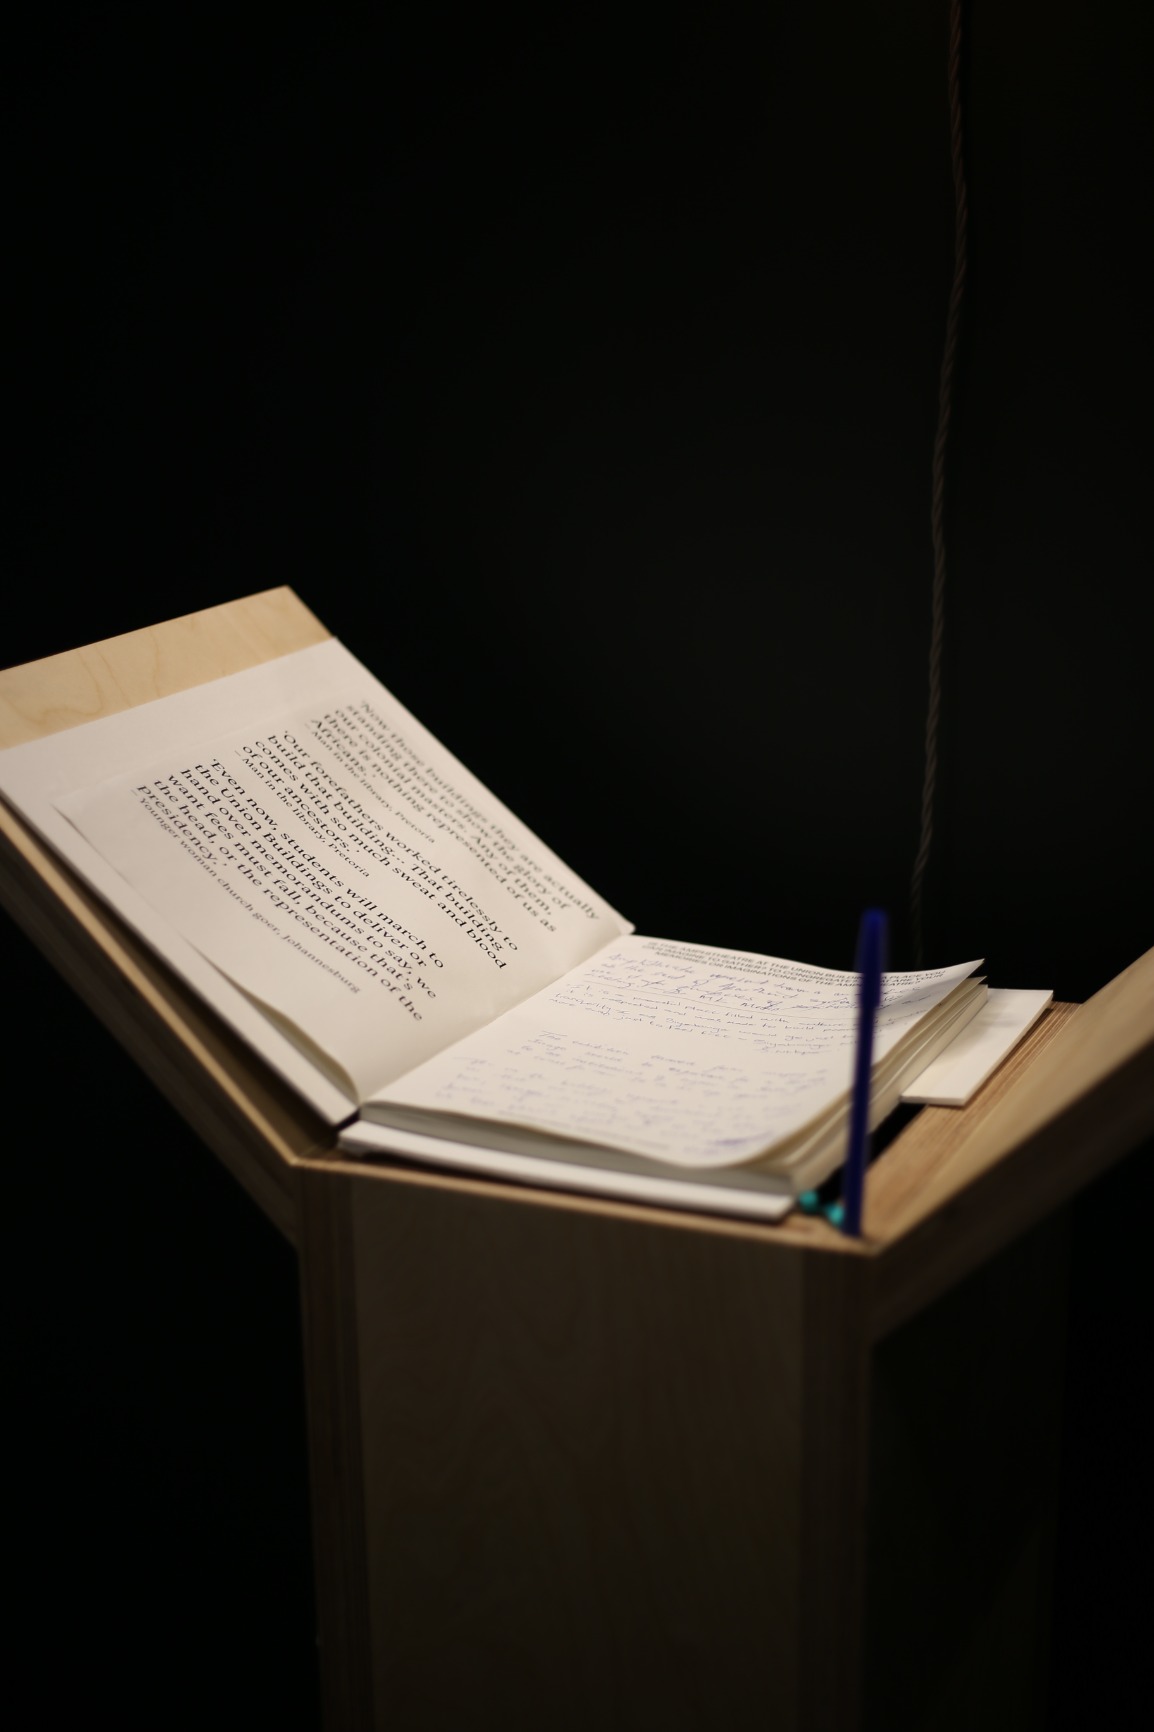 Photo of artwork fragment. Artwork is a series of 6 timber podiums. One podium is seen in this photo with the book on top of podium. The background is darkly lit.